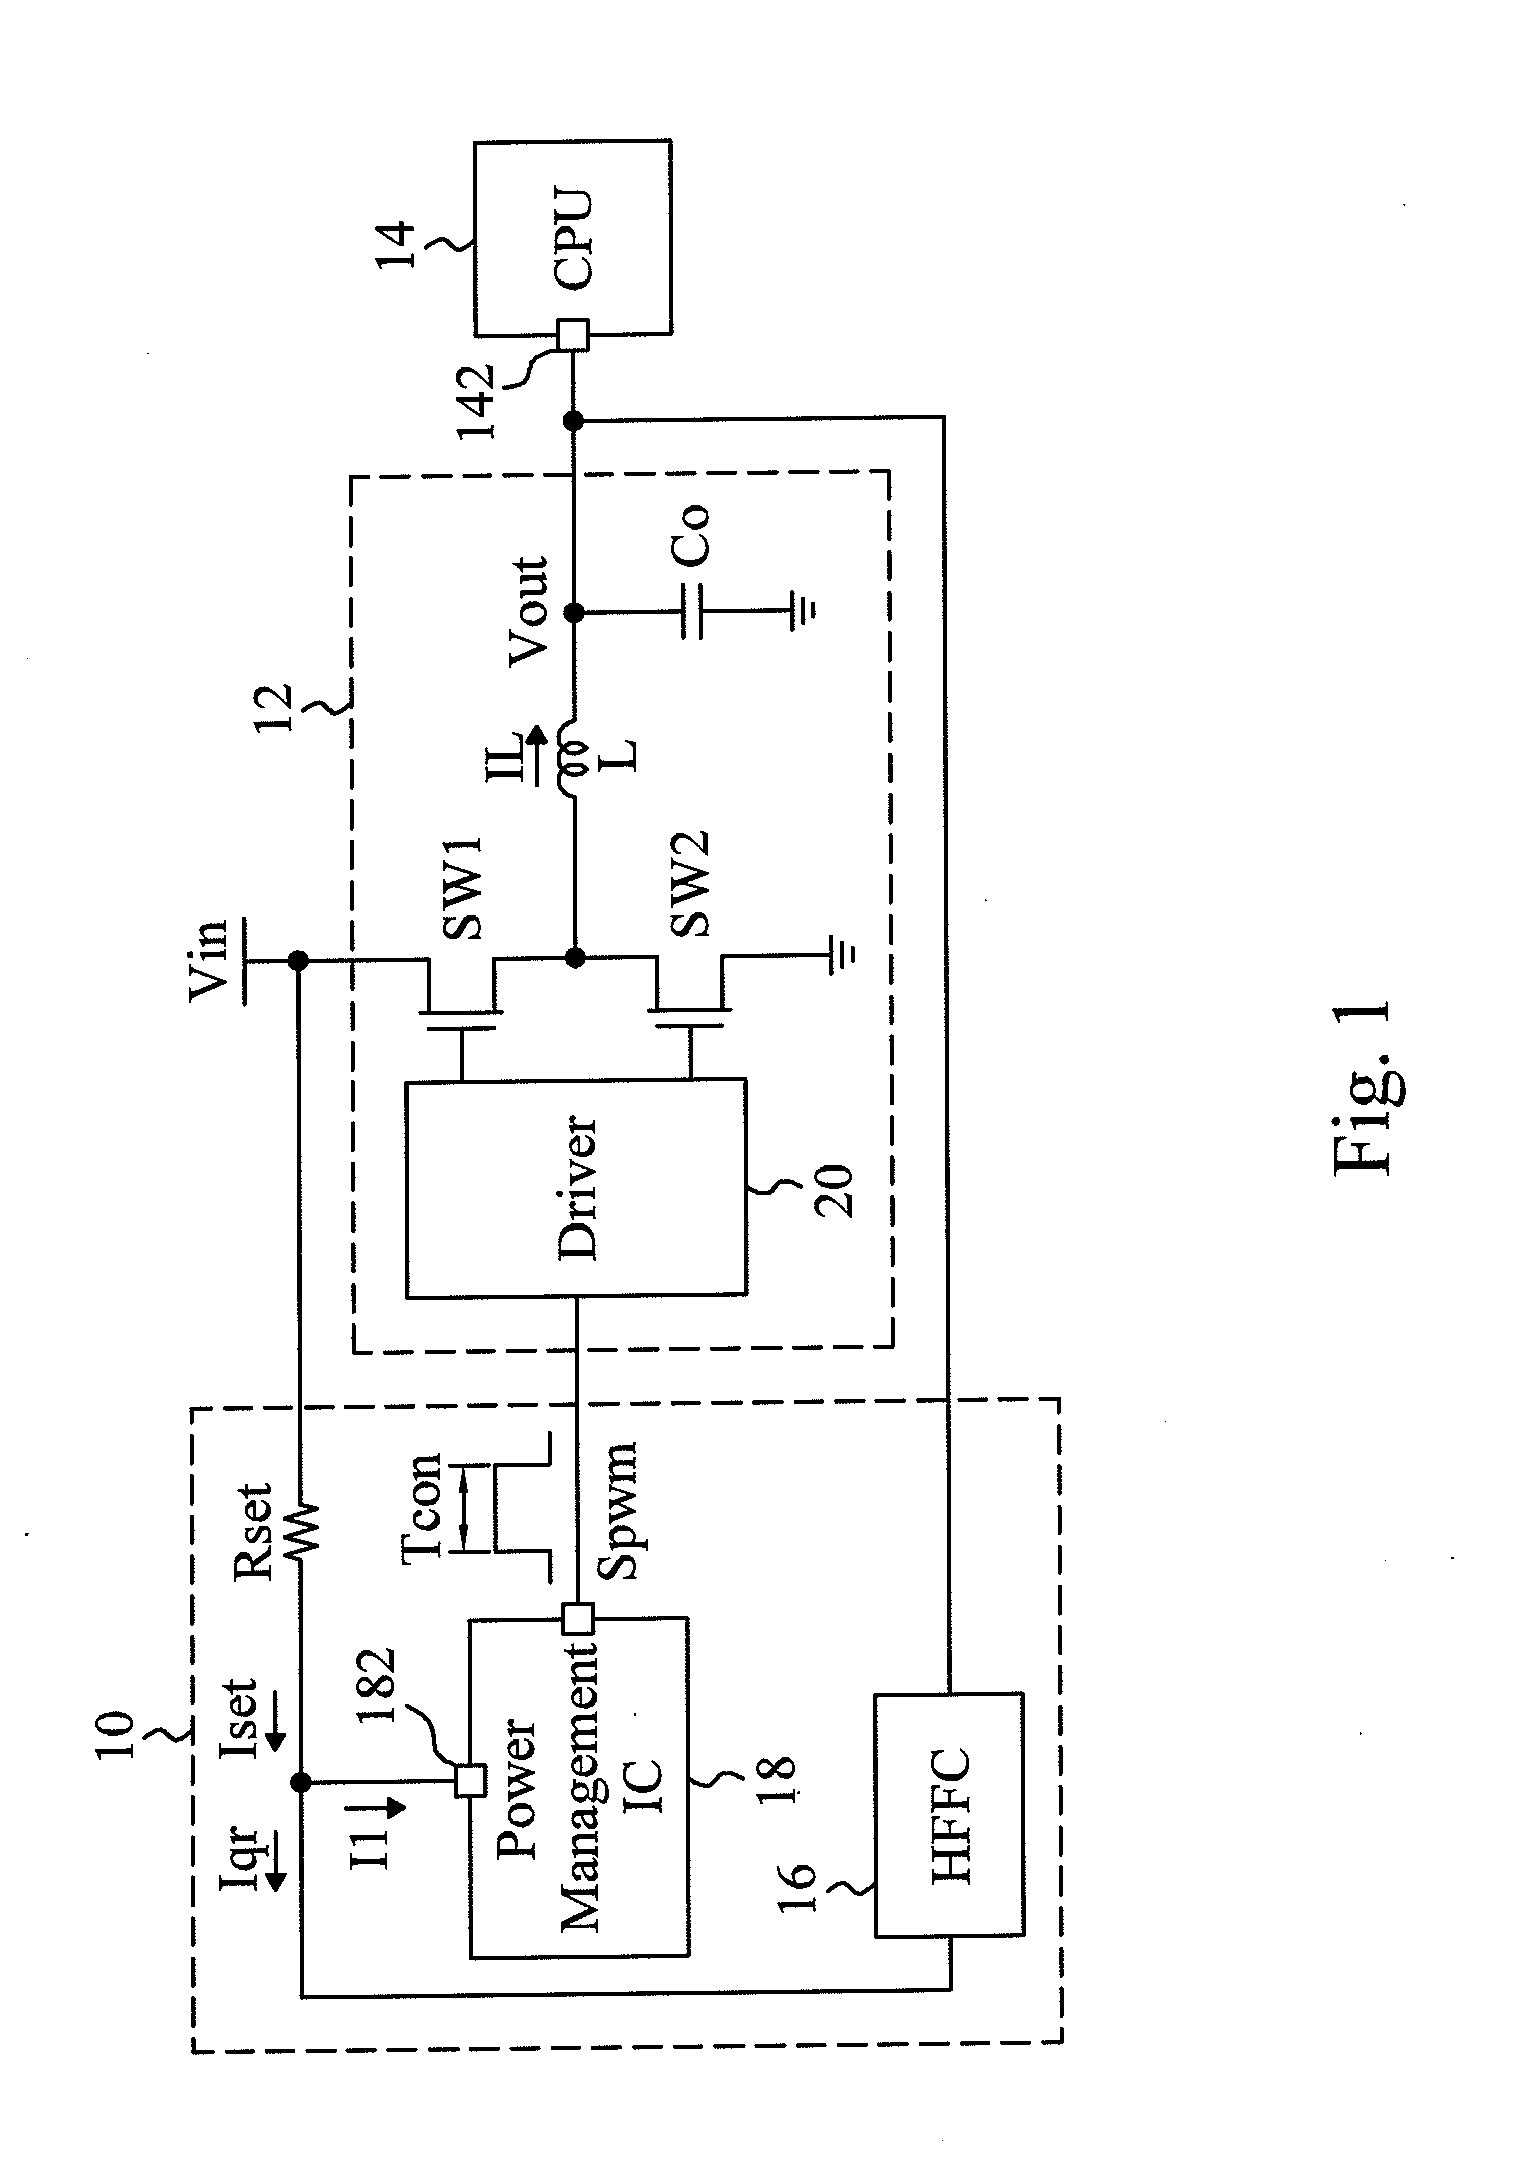 Control circuit and method for a pwm voltage regulator